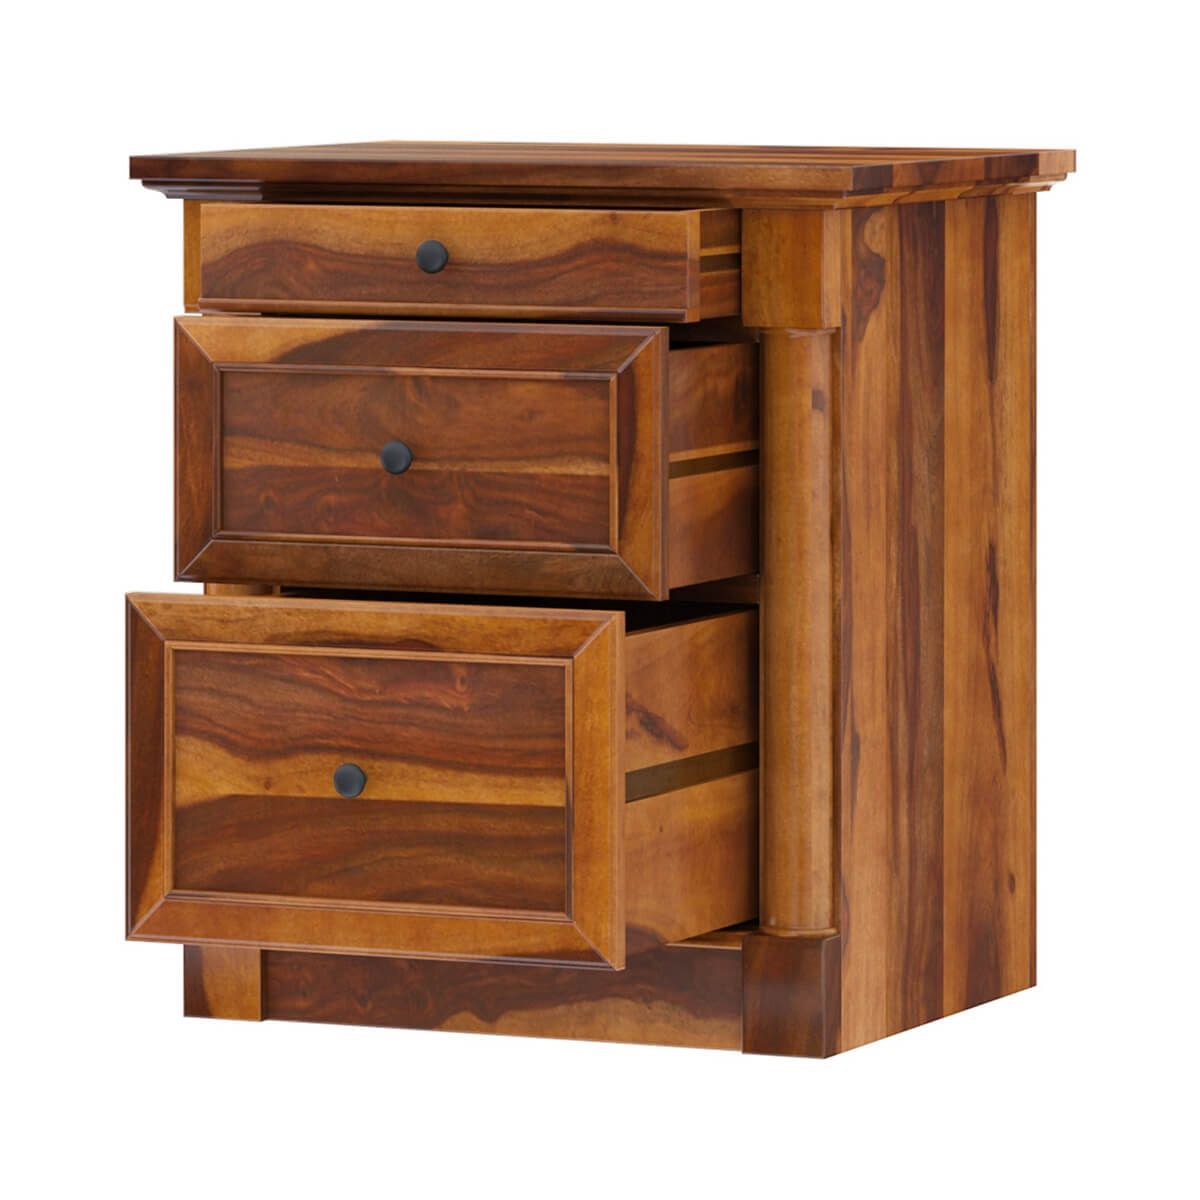 Ansonville Rustic Solid Wood 3 Drawer File Cabinet Throughout Wood Cabinet With Drawers (View 10 of 20)